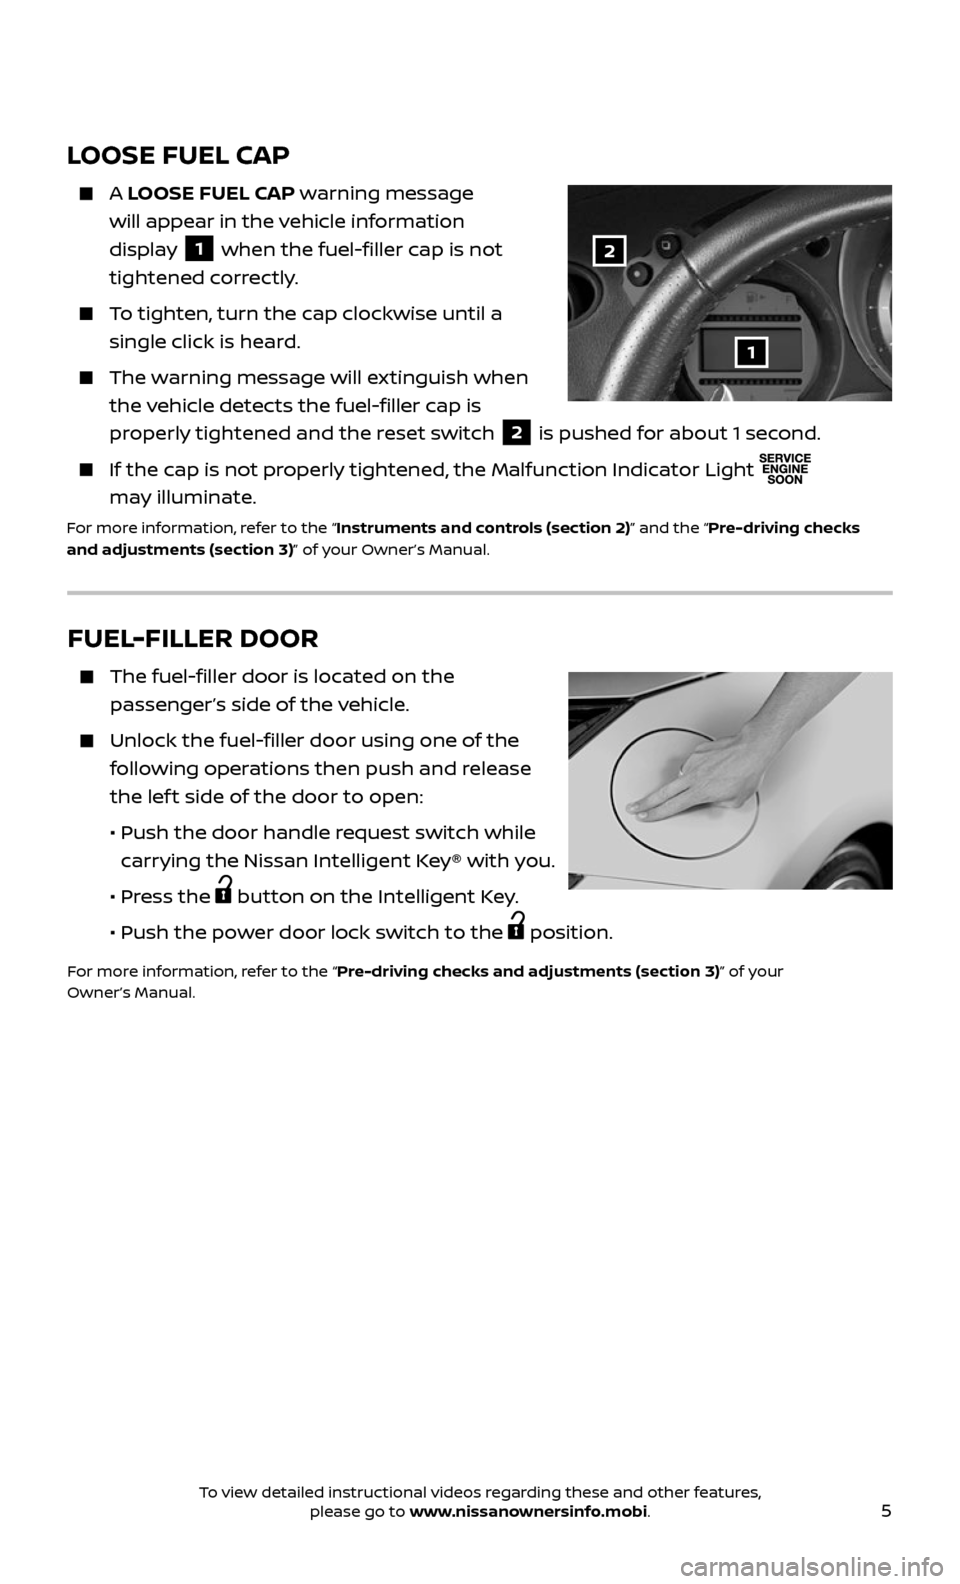 NISSAN 370Z COUPE 2017 Z34 Quick Reference Guide 5
FUEL-FILLER DOOR
    The fuel-filler door is located on the 
passenger’s side of the vehicle. 
    Unlock the fuel-filler door using one of the 
following operations then push and release 
the lef